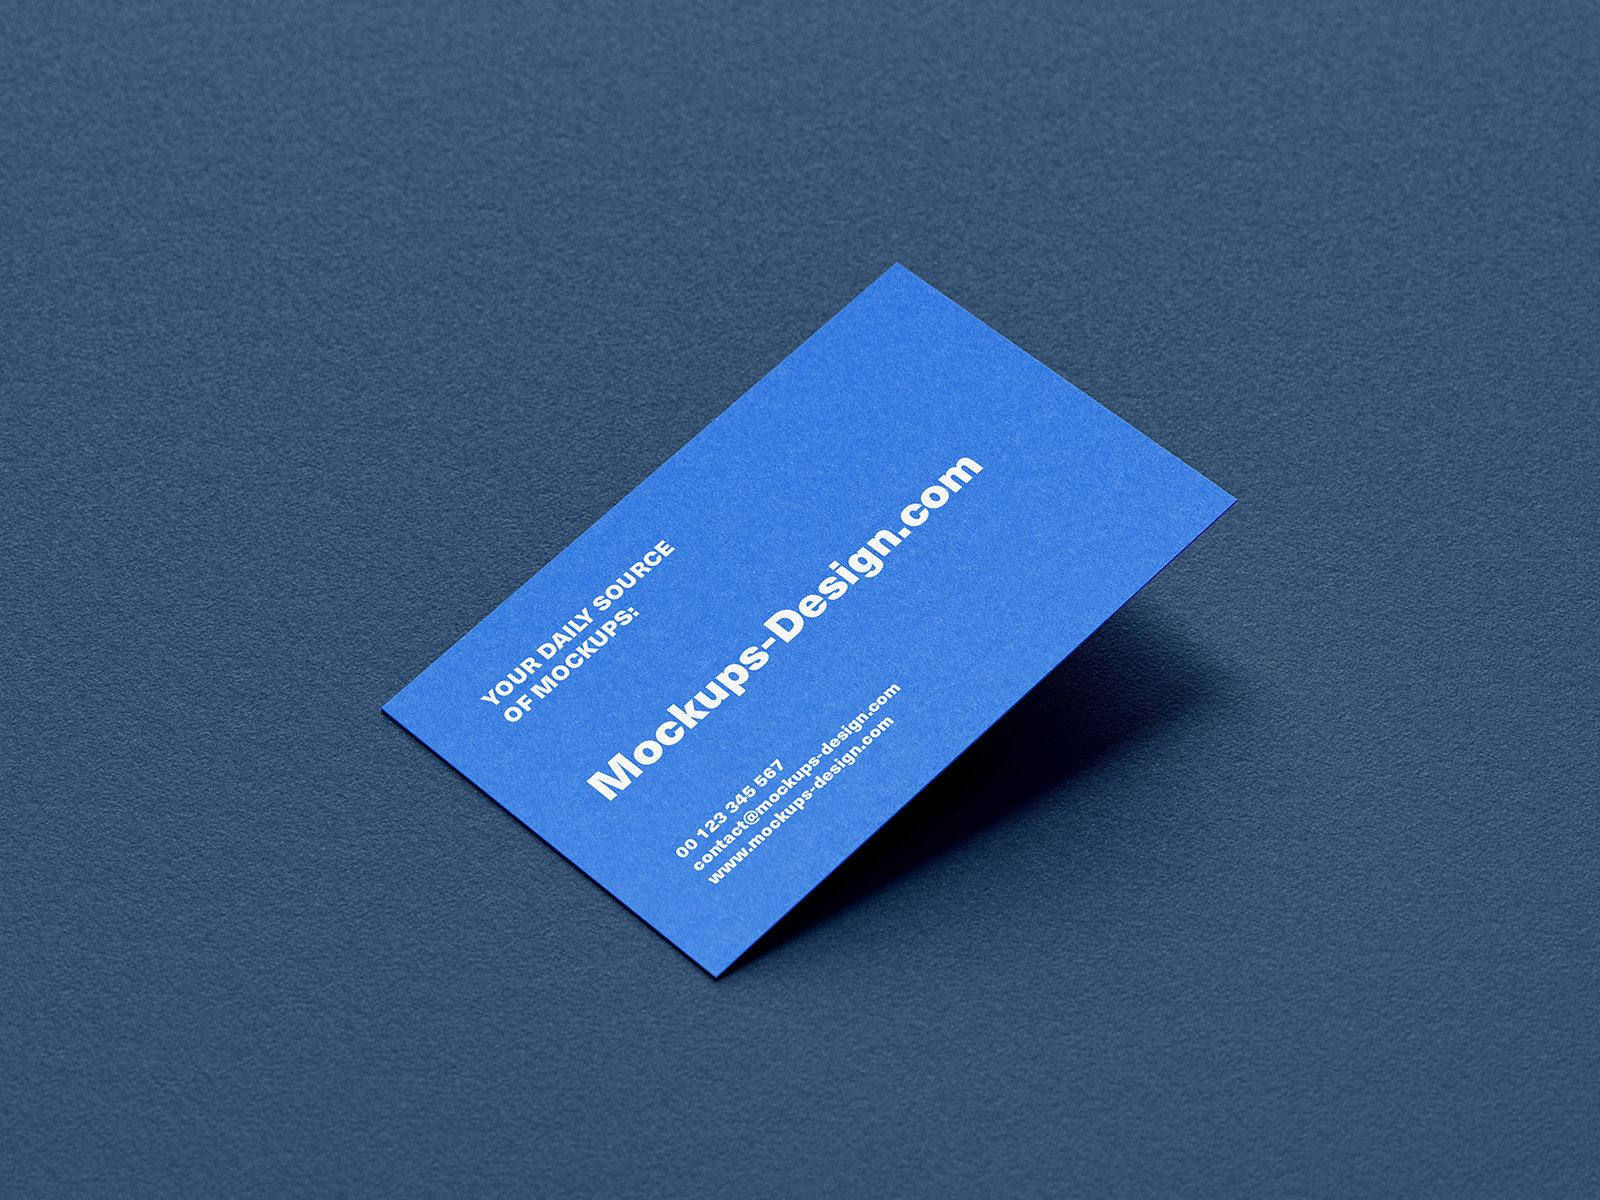 4 Business Cards Mockups on Textured Background in Various Sights FREE PSD